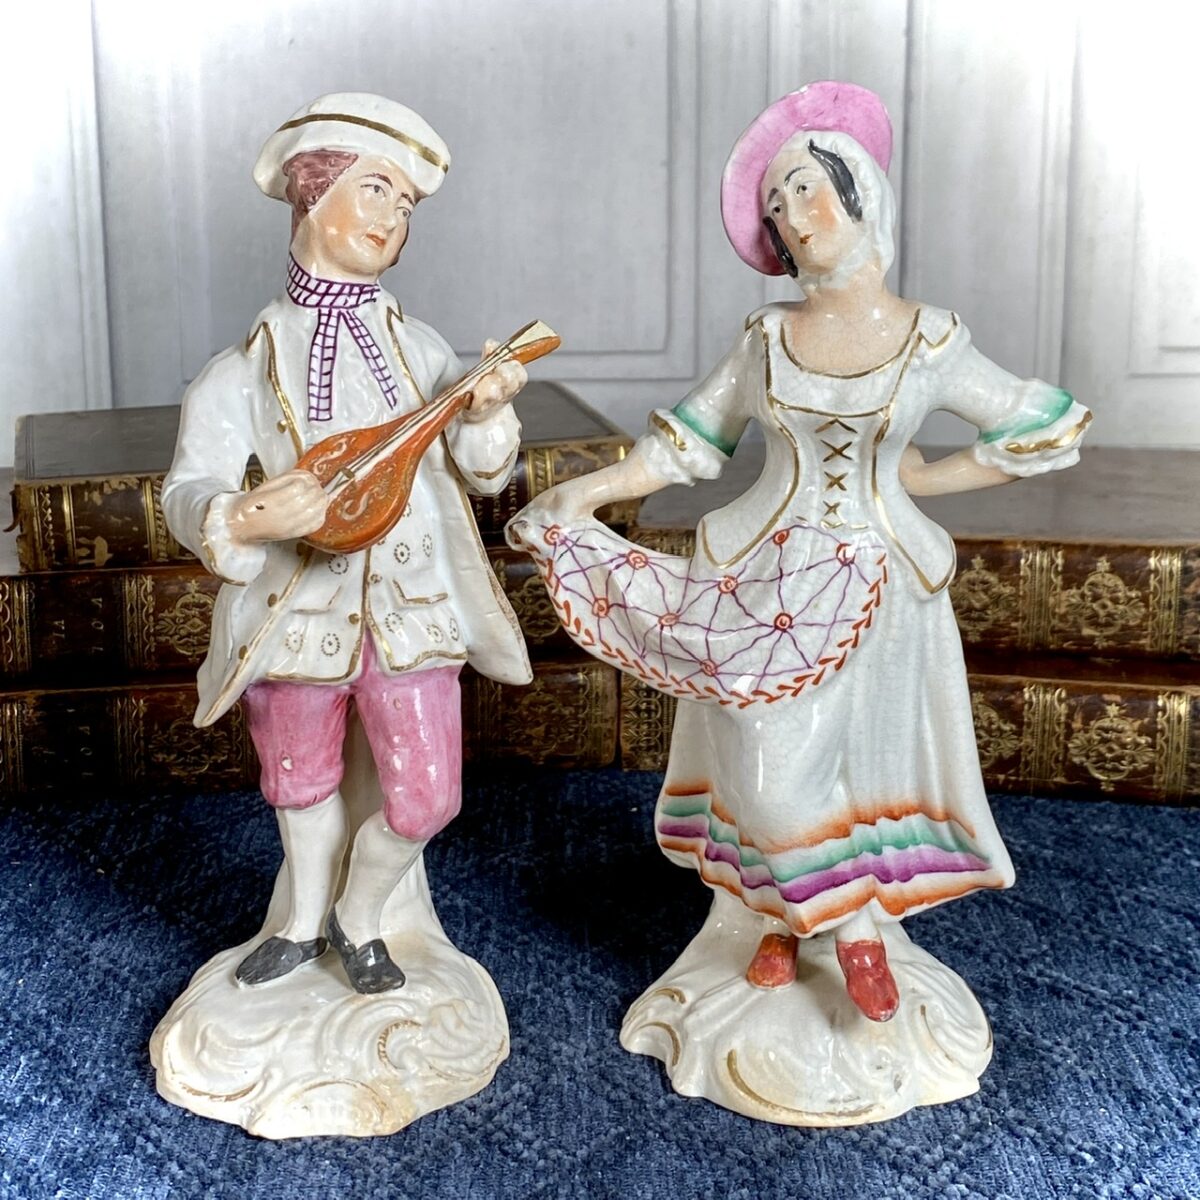 Pair of Staffordshire Figures, Musician & Dancer.